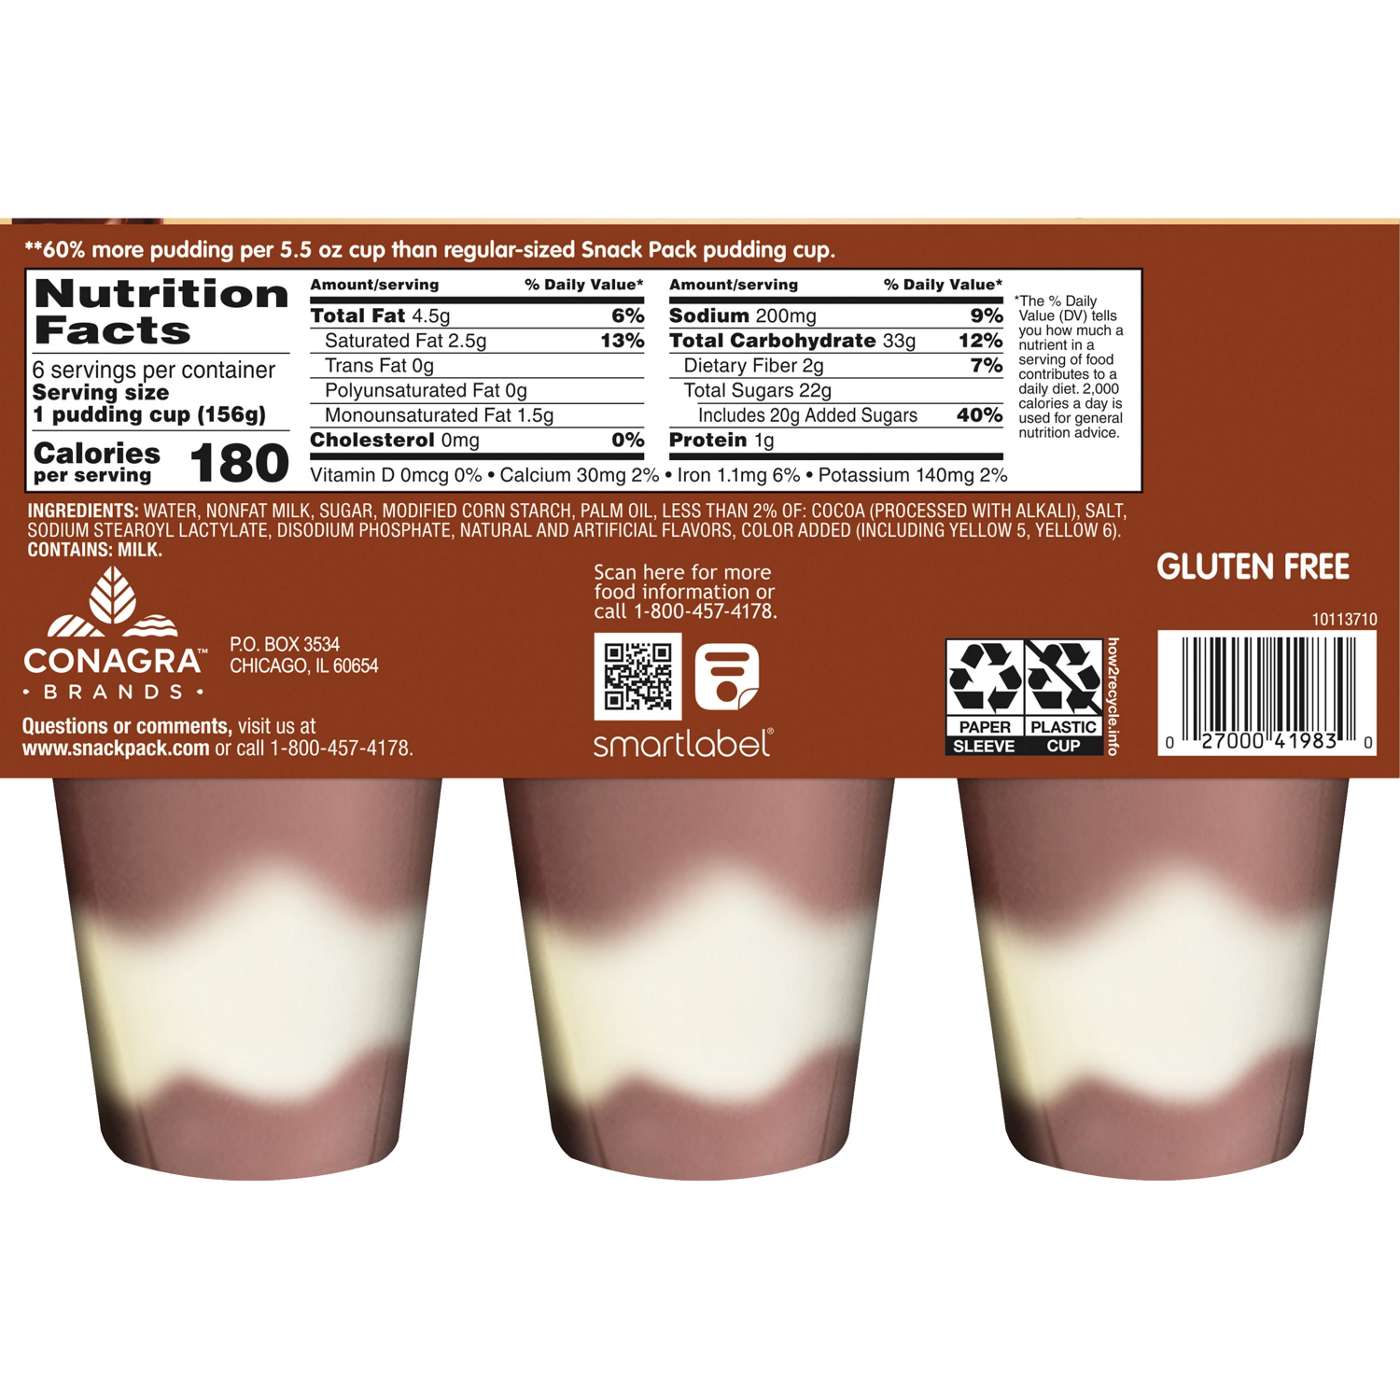 Snack Pack Super Size Chocolate Vanilla Pudding Cups; image 2 of 7